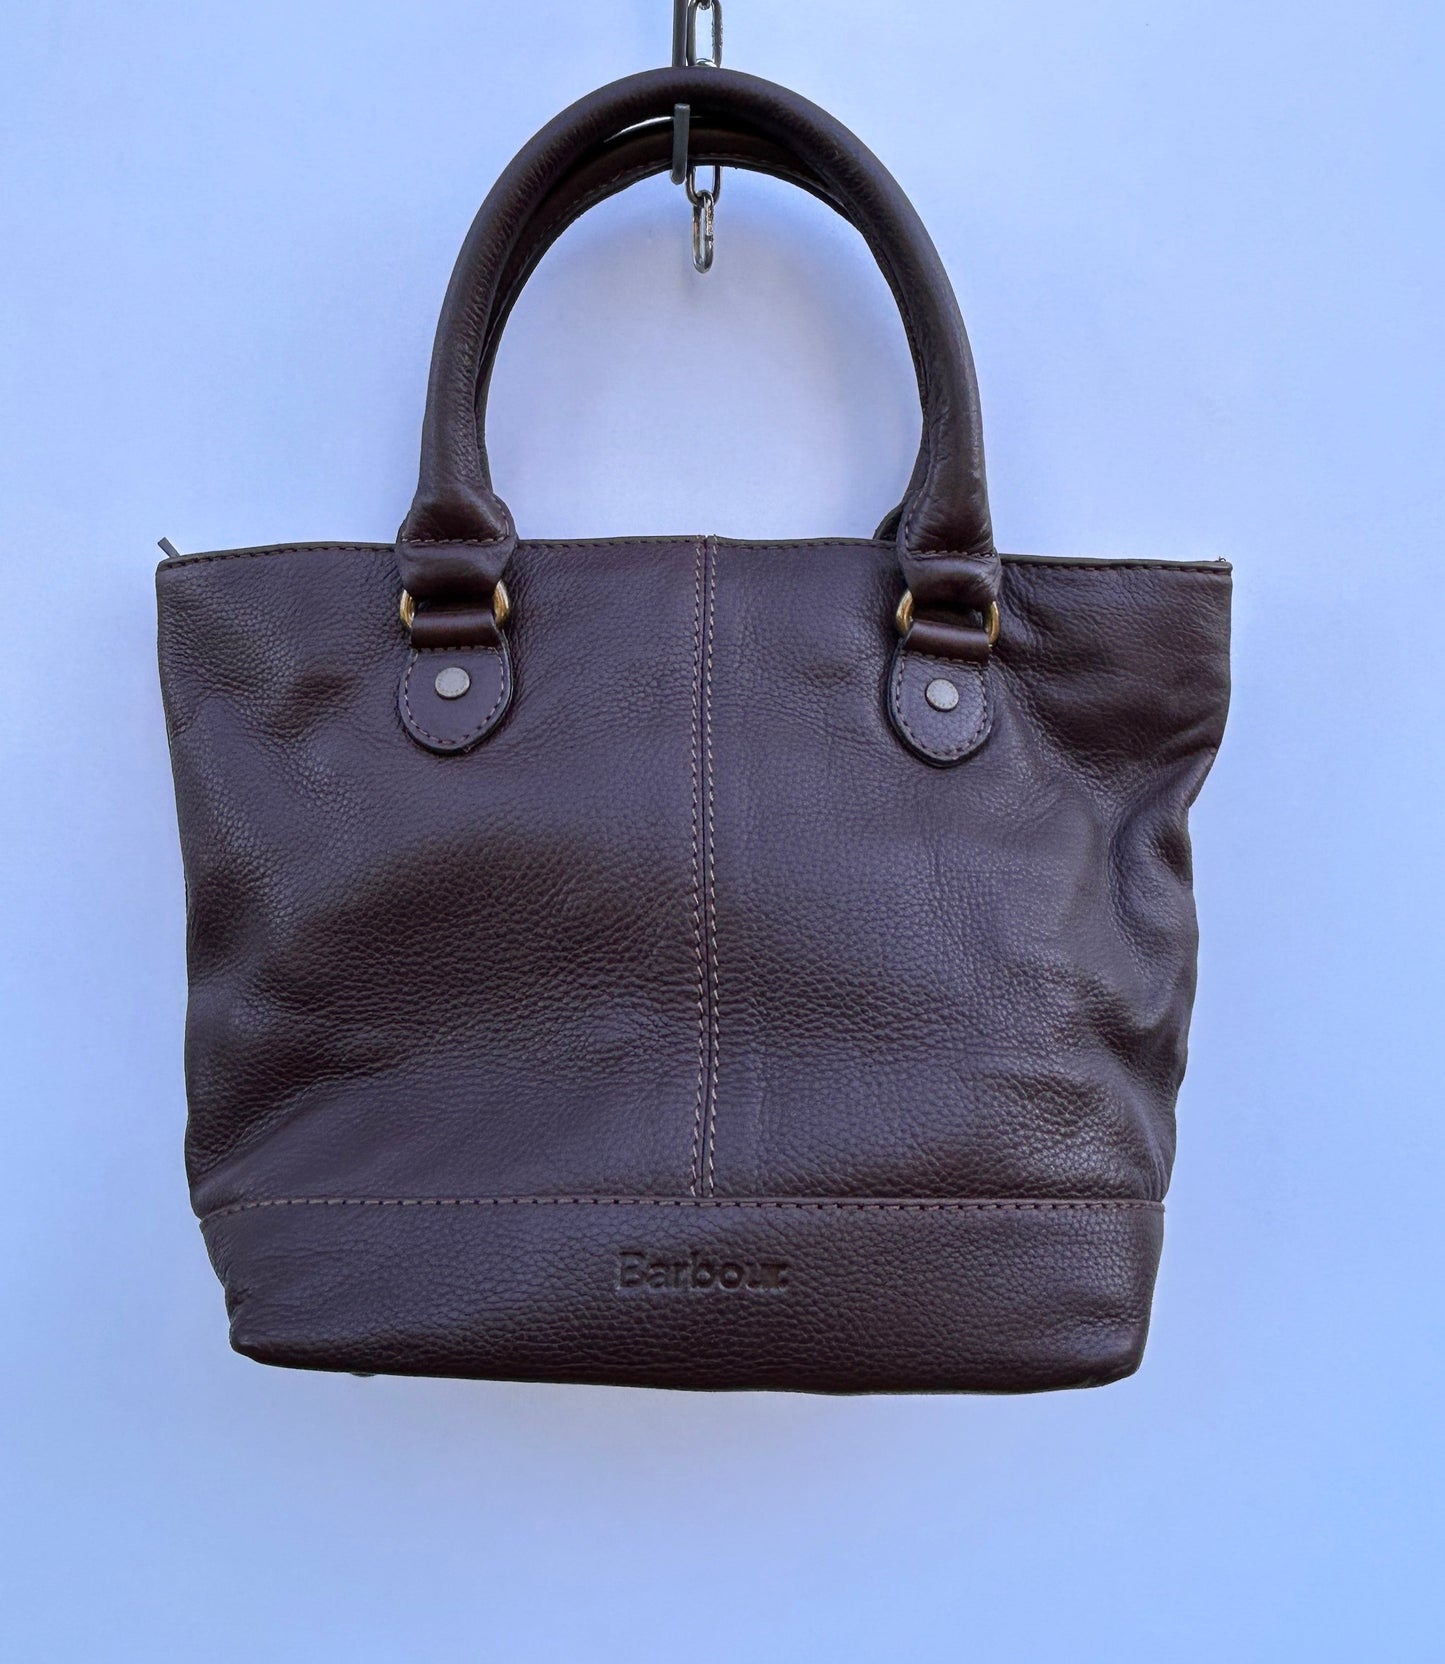 Borsa Barbour In Pelle Marrone - Brown Leather Small Shoulder Bag